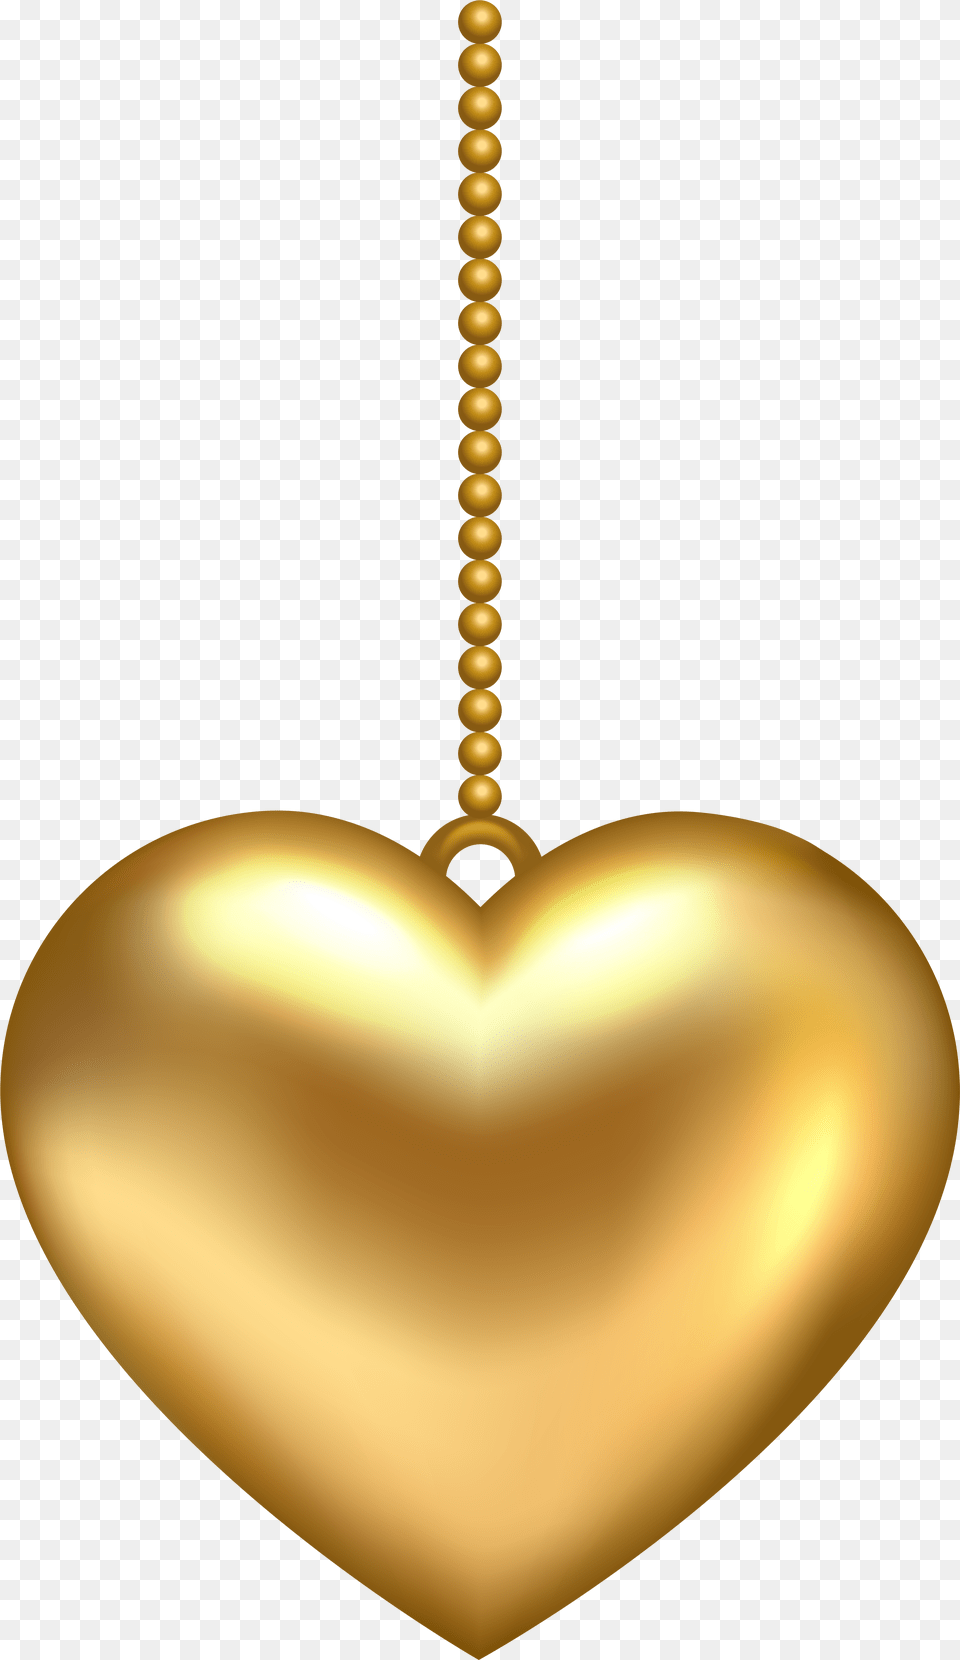 Hanging Clip Art Image Golden Heart, Accessories, Pendant, Gold, Jewelry Png